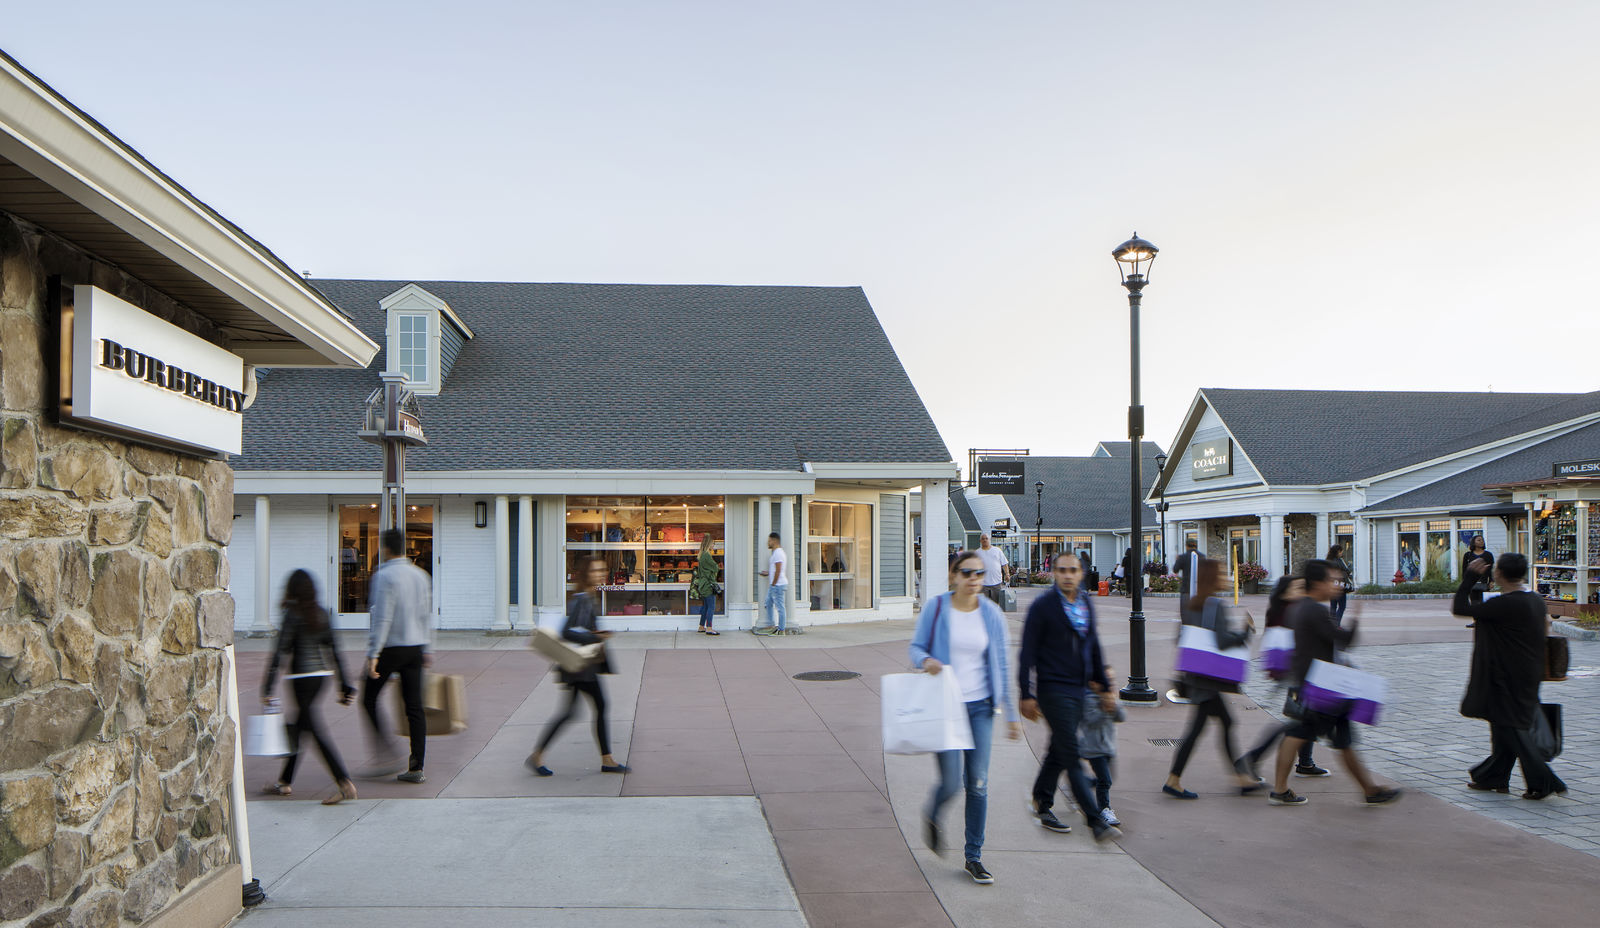 Market Hall at Woodbury Commons Outlets